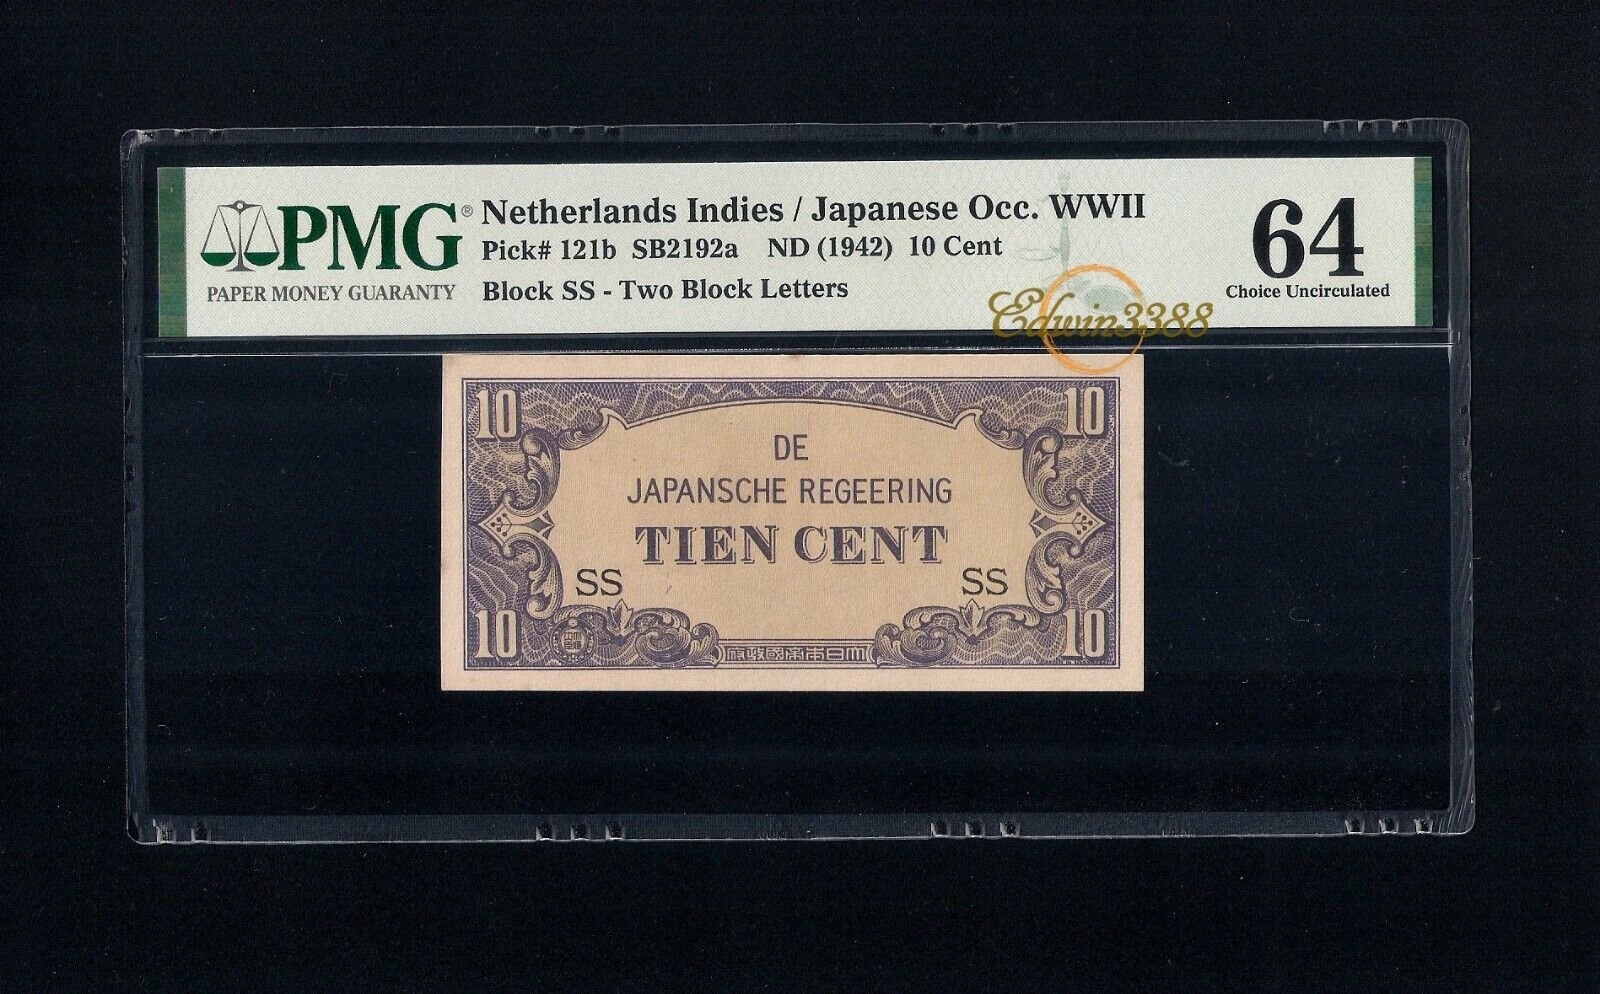 Detroit Mall Netherlands Indies Great interest Japanese Occupation 10 Cents bl Scarce Tien